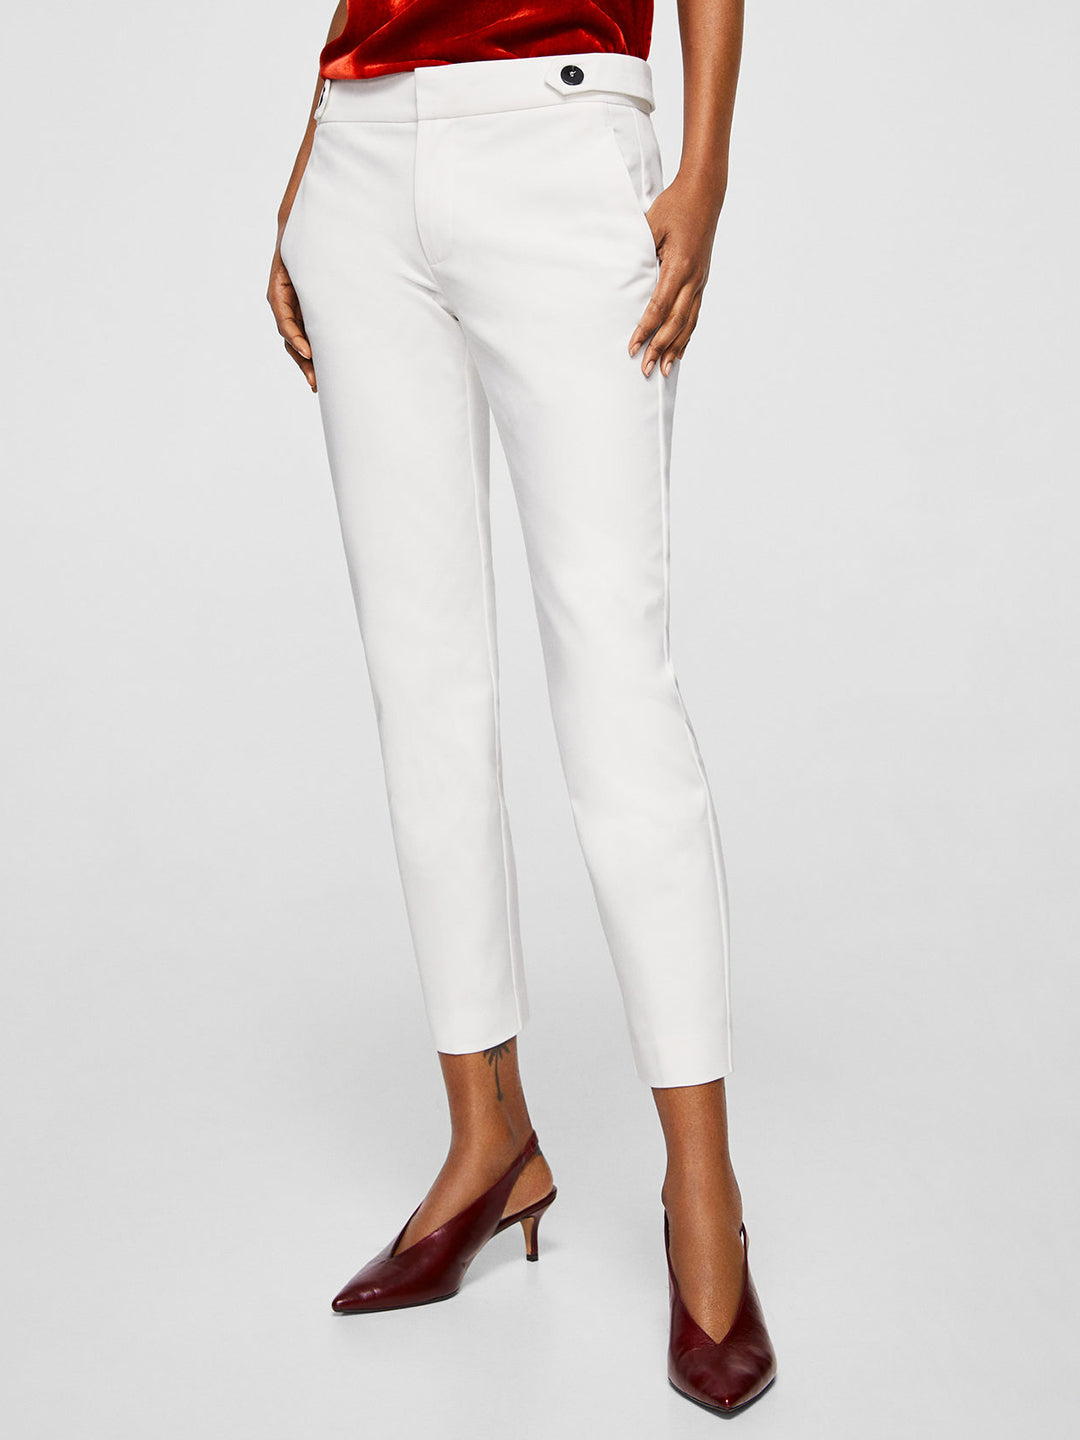 Women White Regular Fit Solid Cigarette Trousers